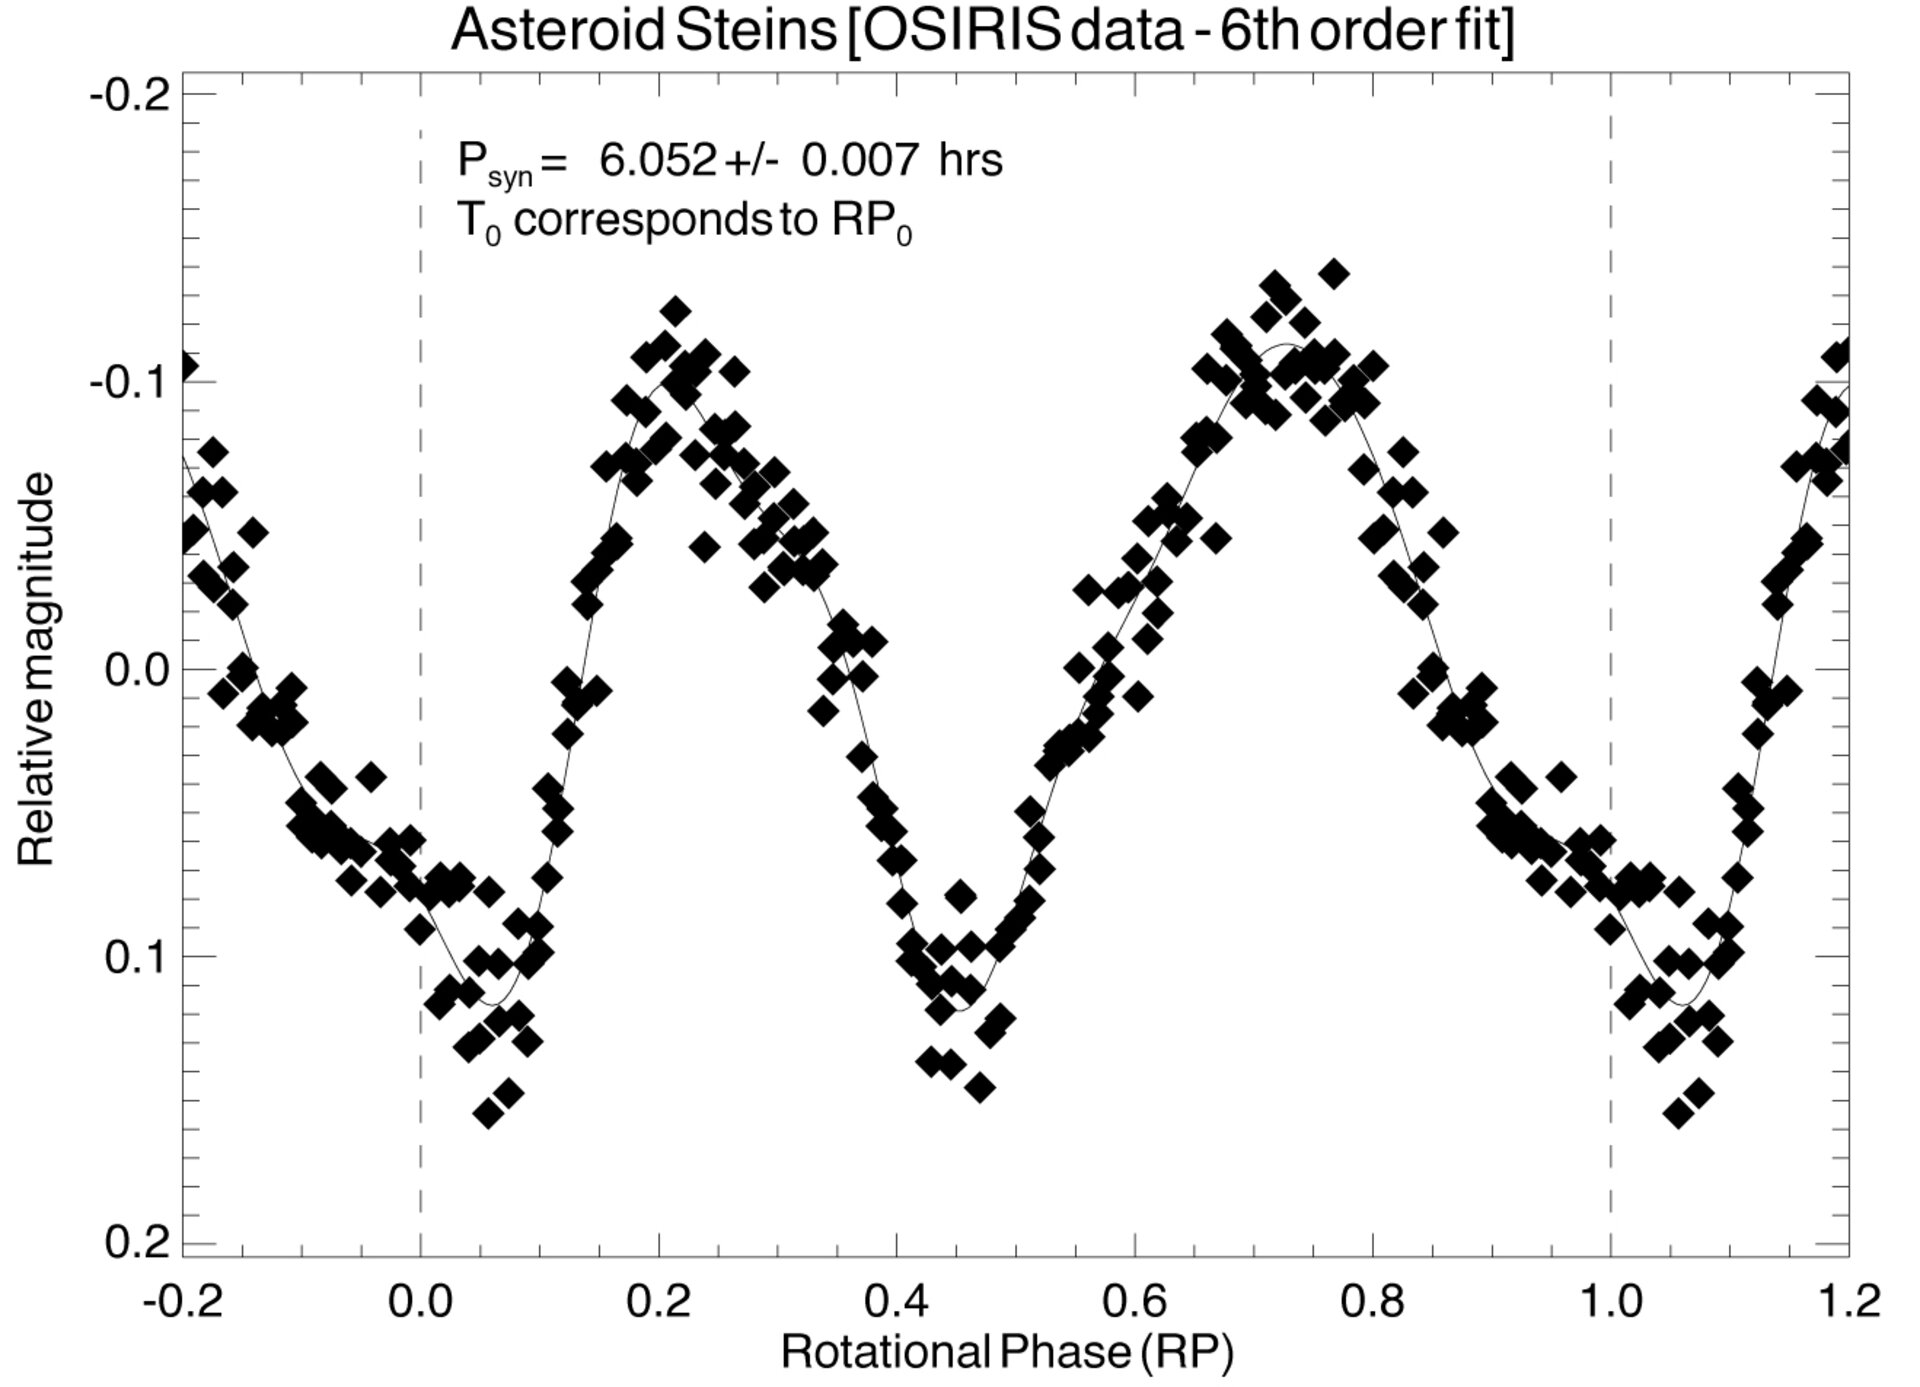 Light curve of the asteroid Steins